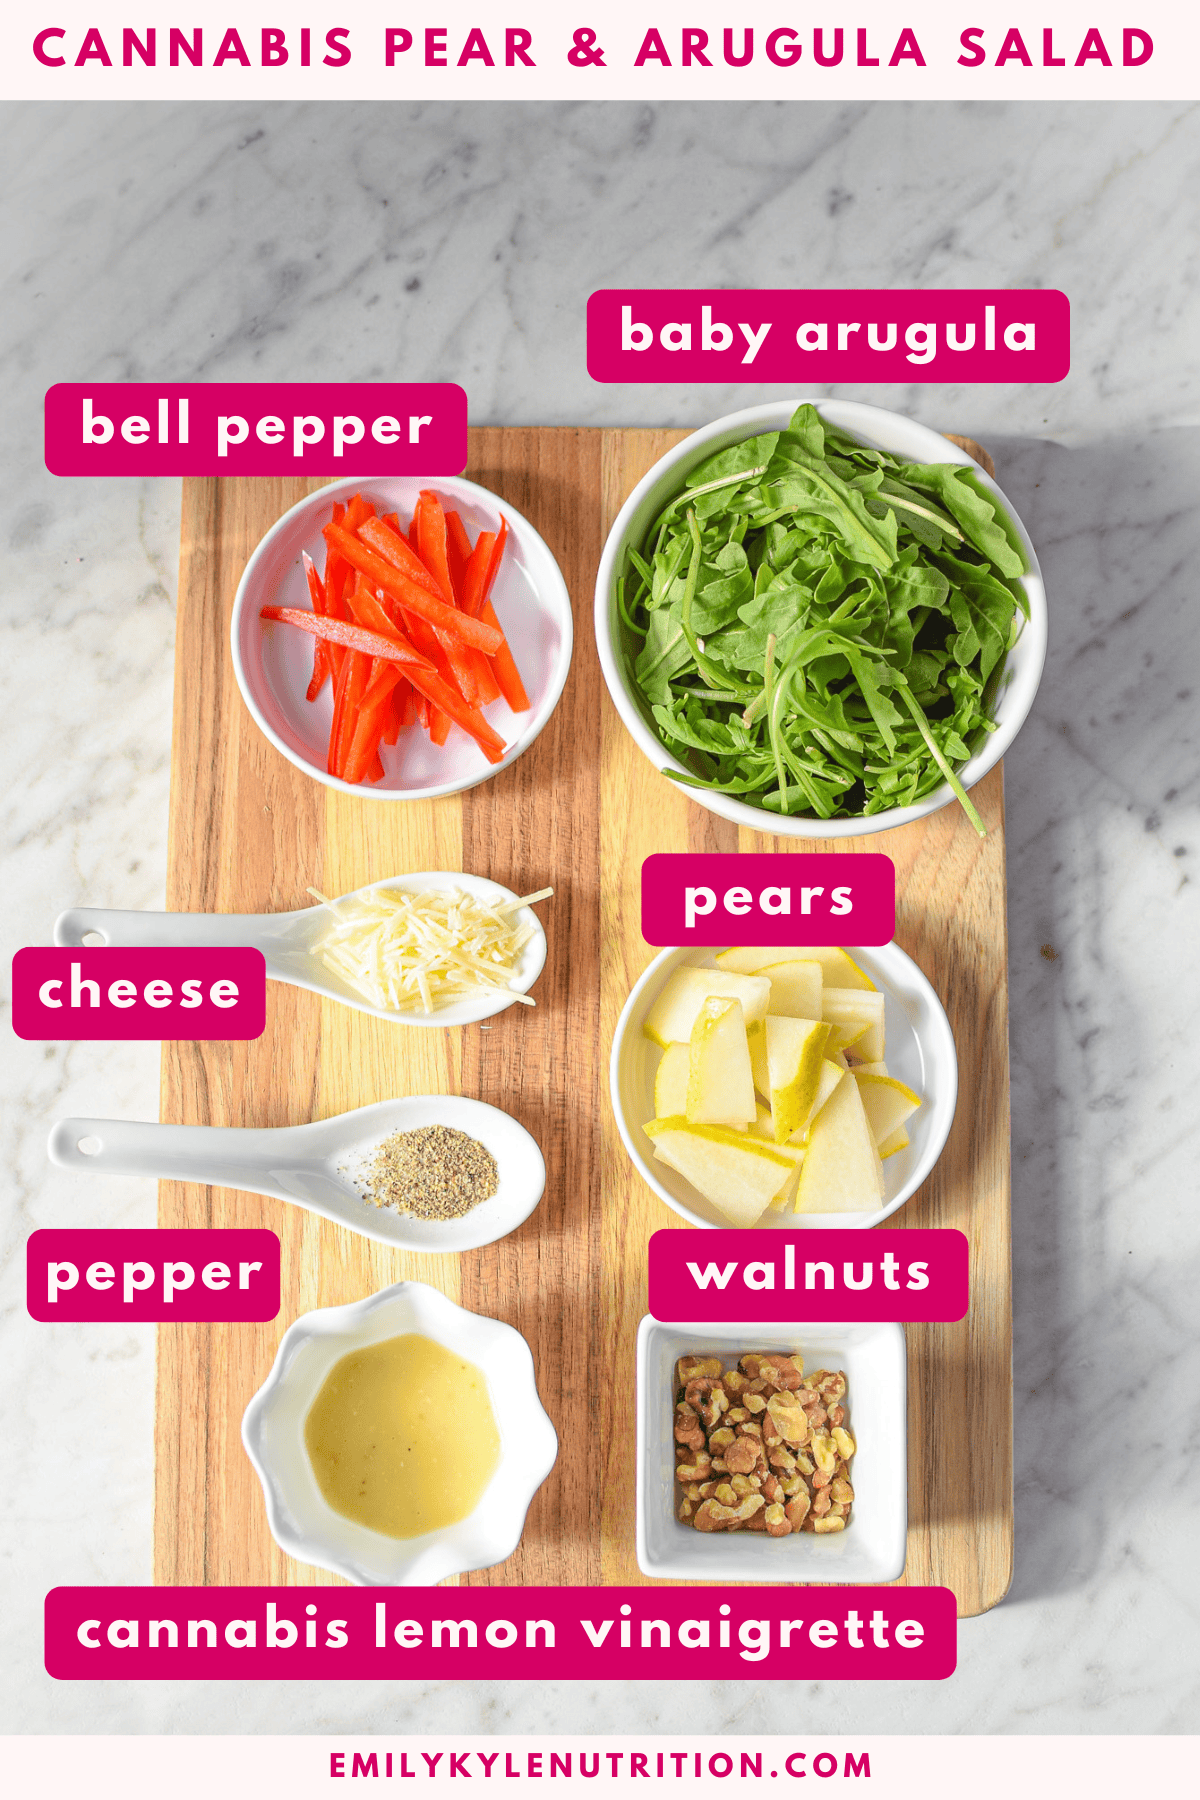 All of the ingredients needed to make a cannabis pear and arugula salad on a cutting board.